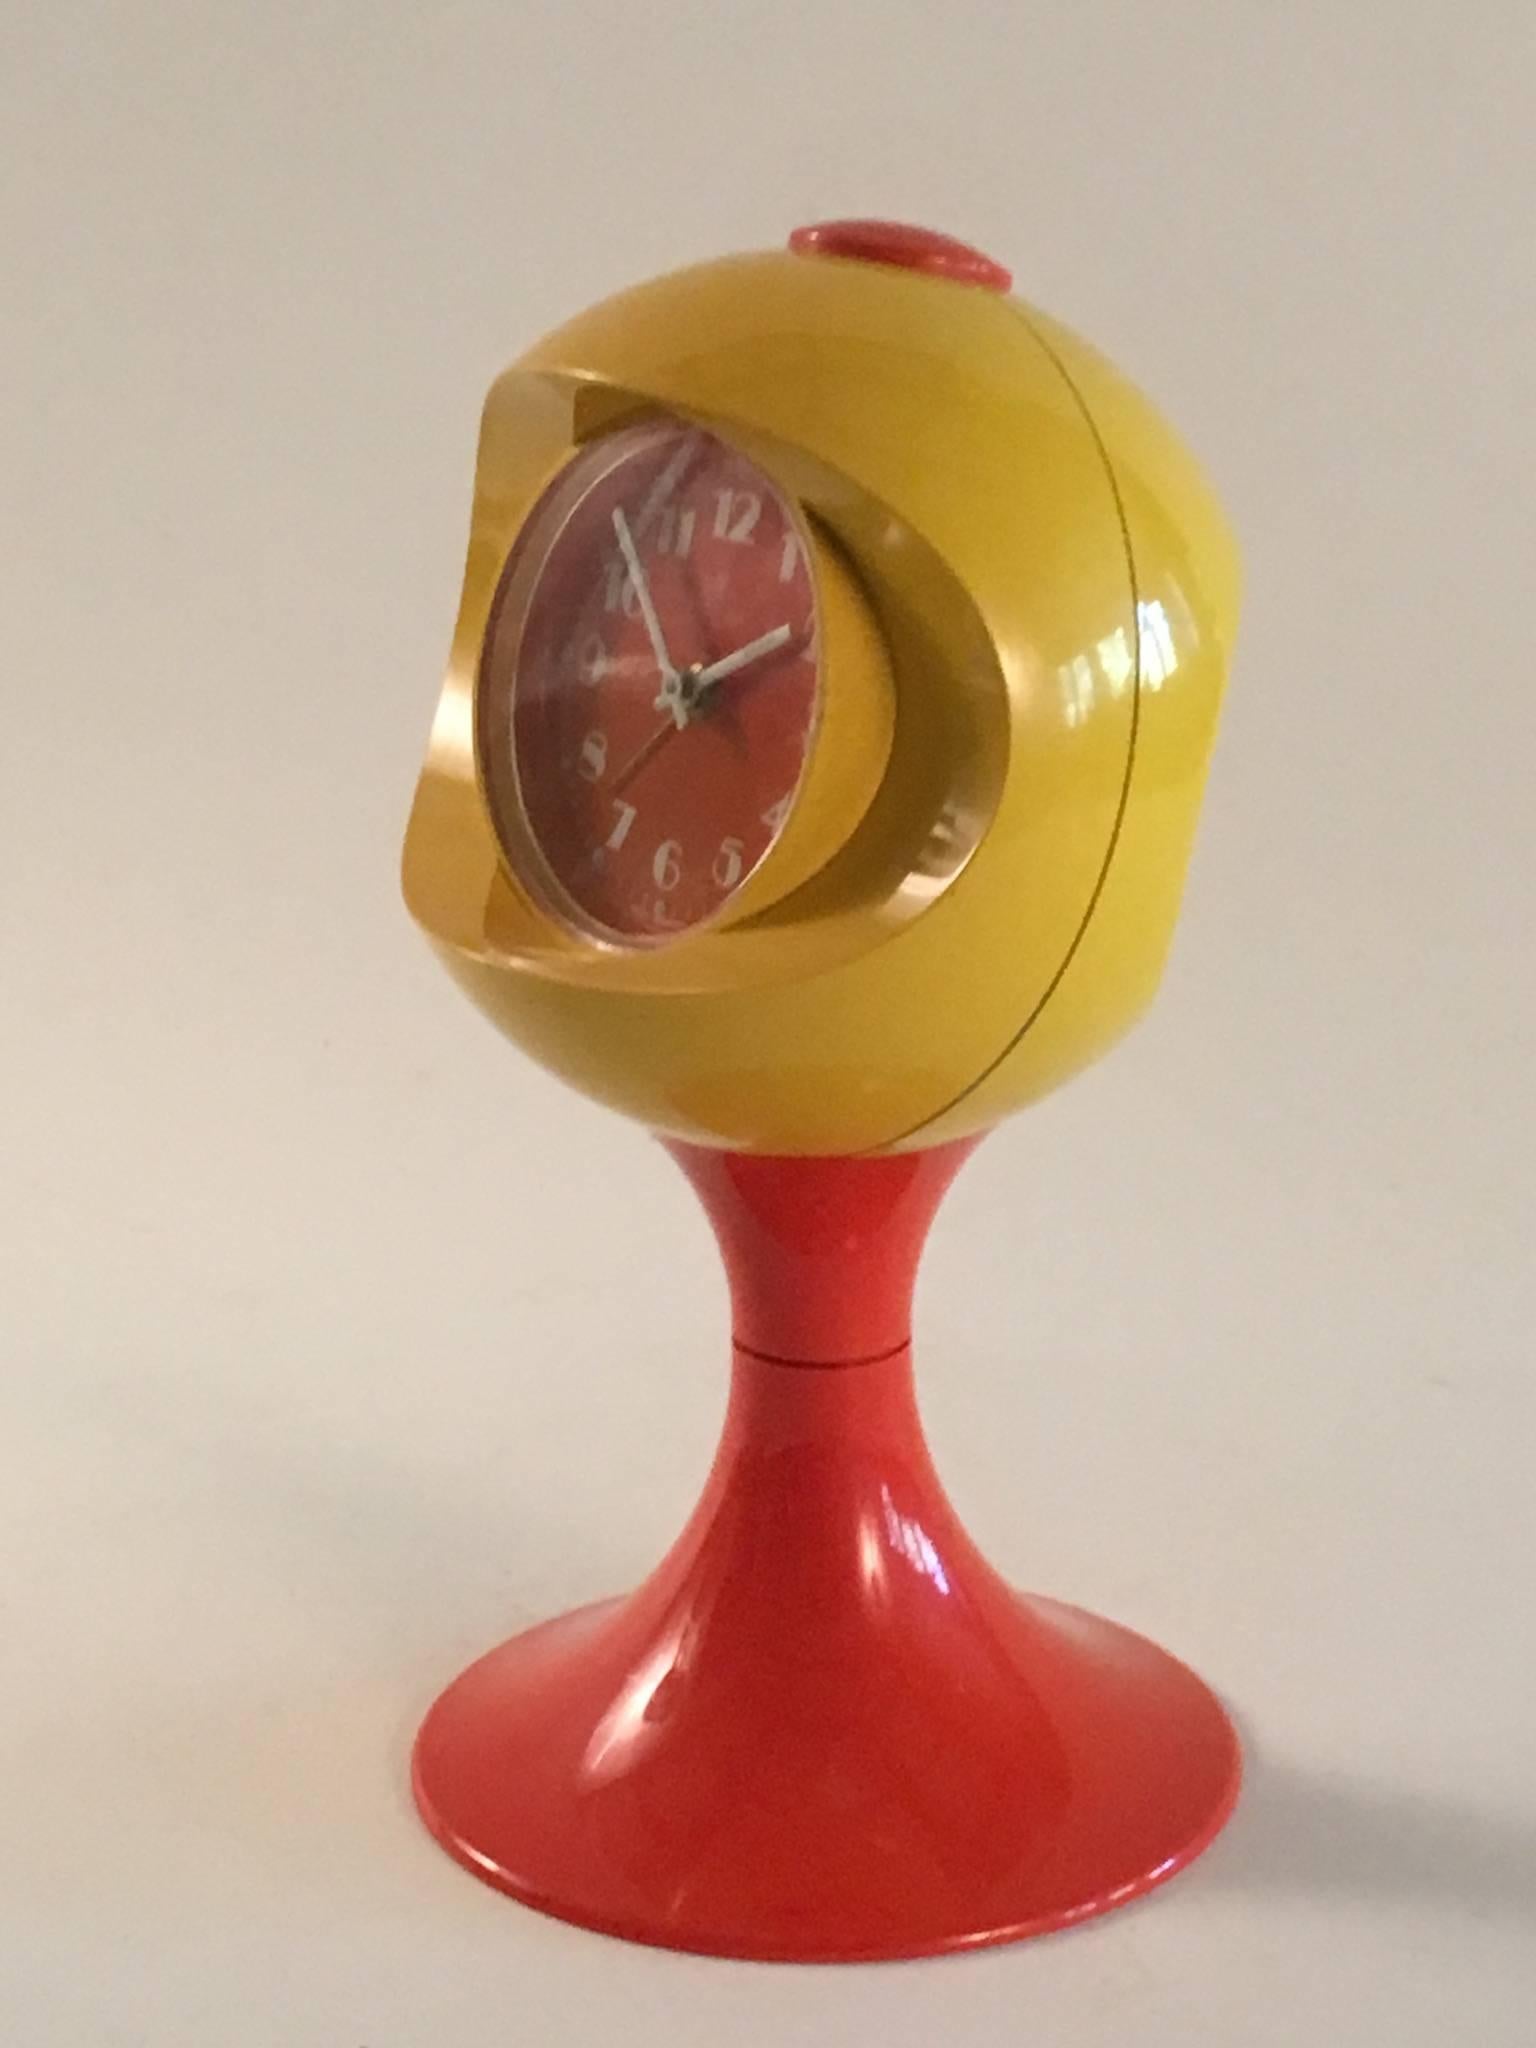 A good Meistea mechanical pedestal clock from the 'space race' era of the late 1960s. In excellent condition with two winding knobs for the clock and the alarm. The yellow and orange plastic is bright and shiny without any blemishes and it keeps